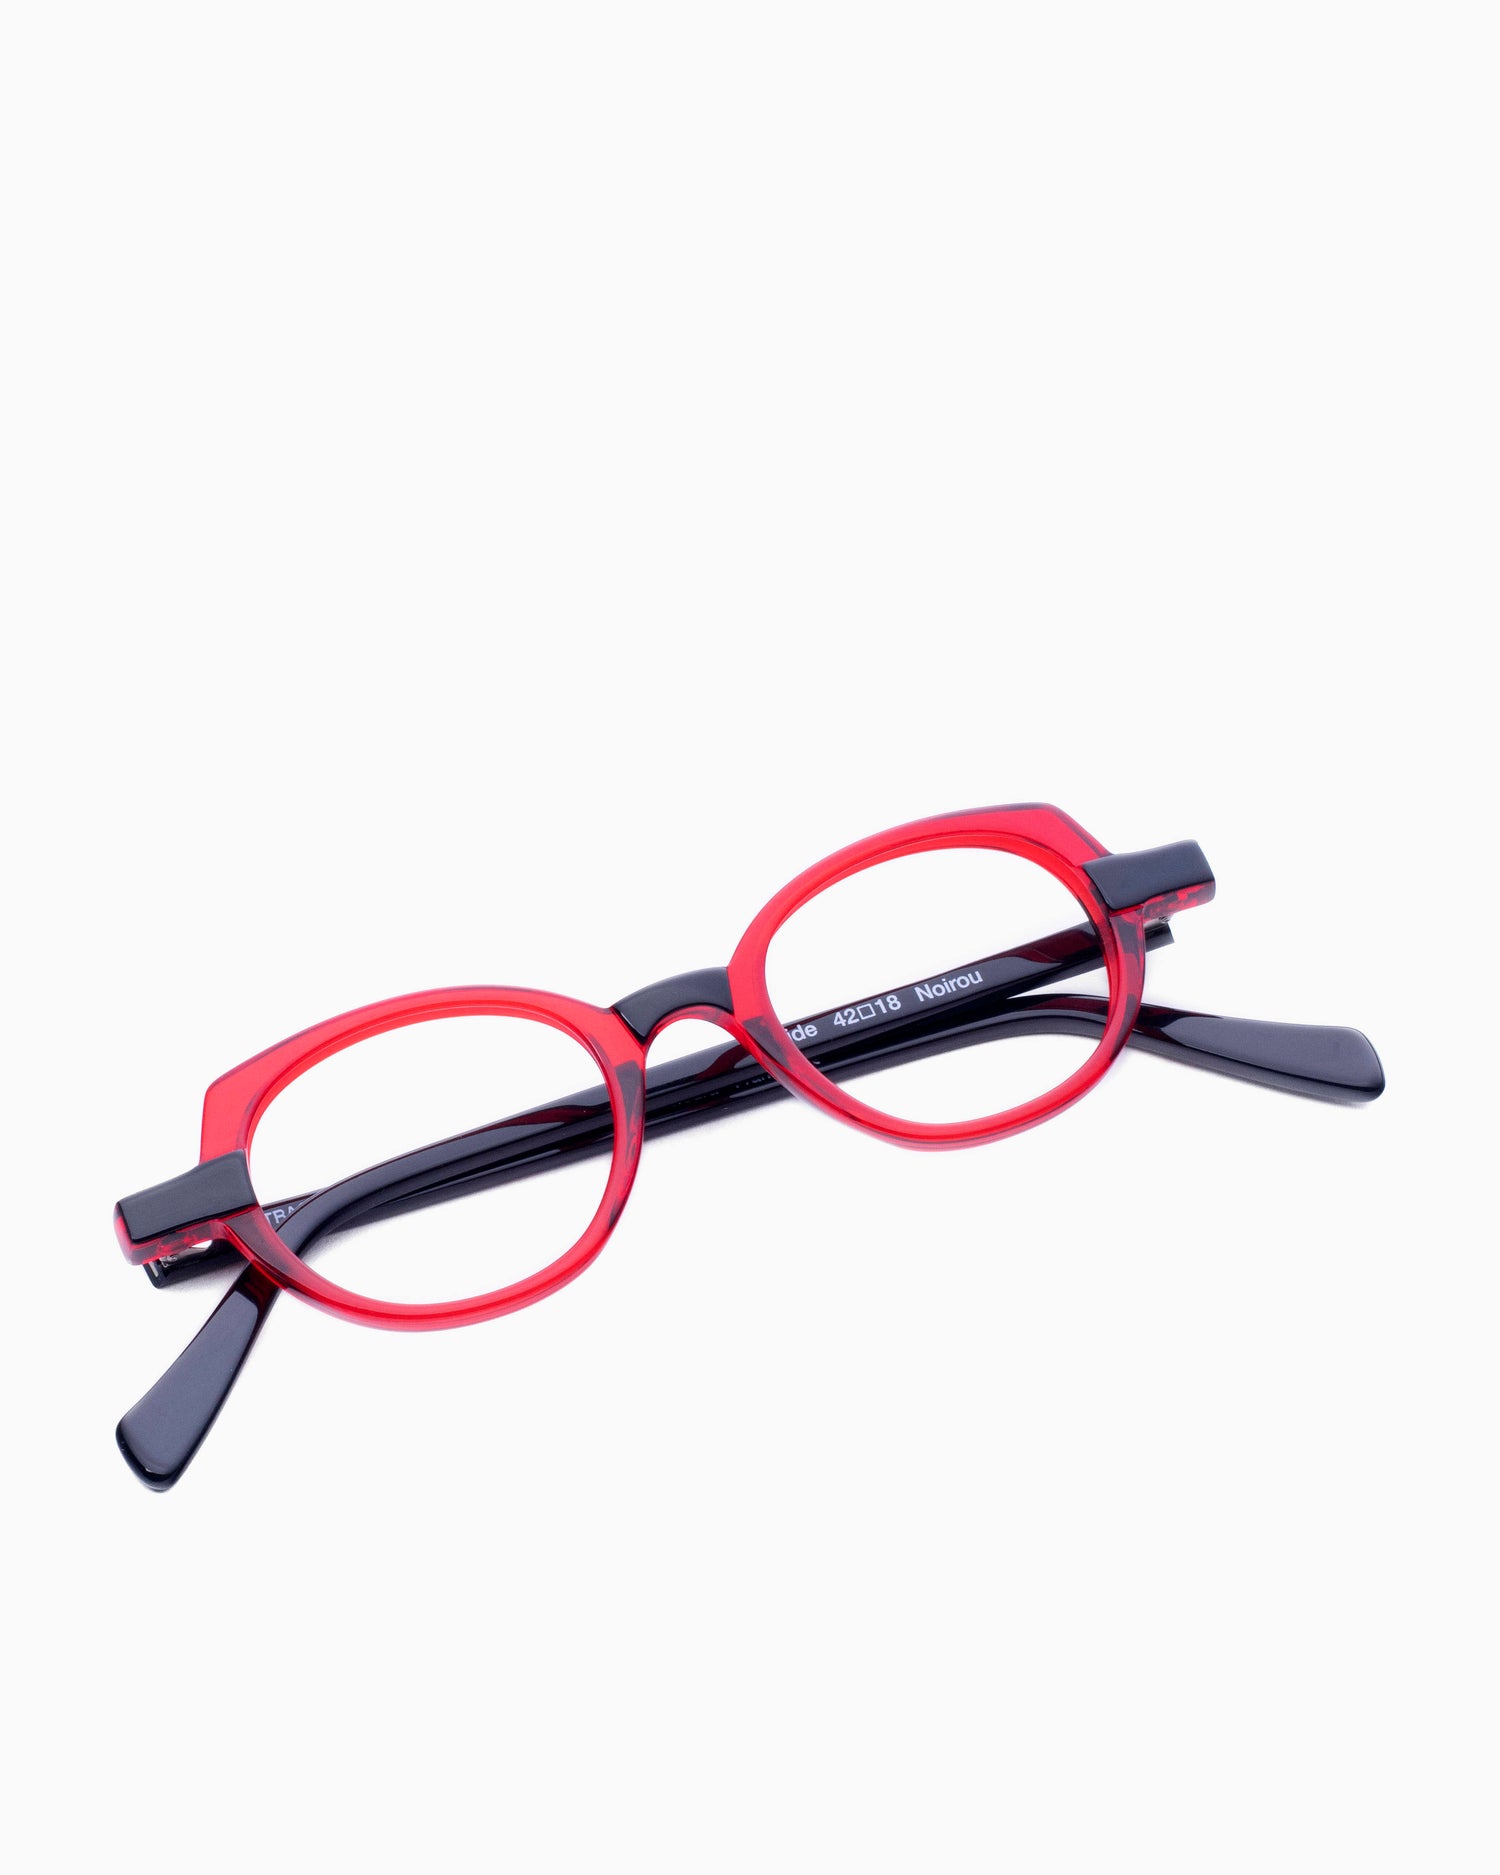 TRACTION - Ovid - Noirou | glasses bar:  Marie-Sophie Dion